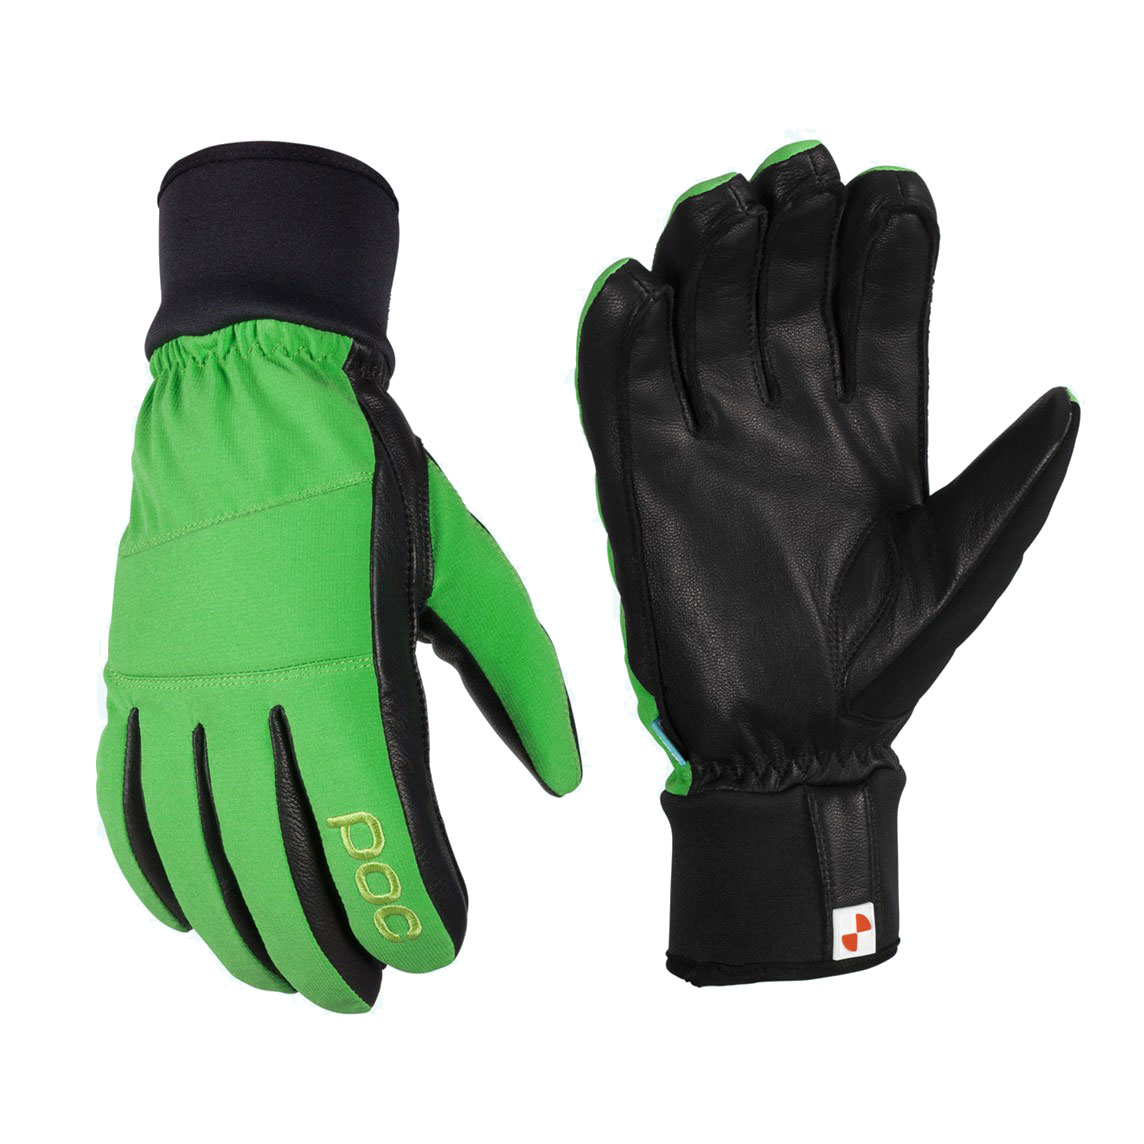 POC Nail Glove, Blister Gear Review